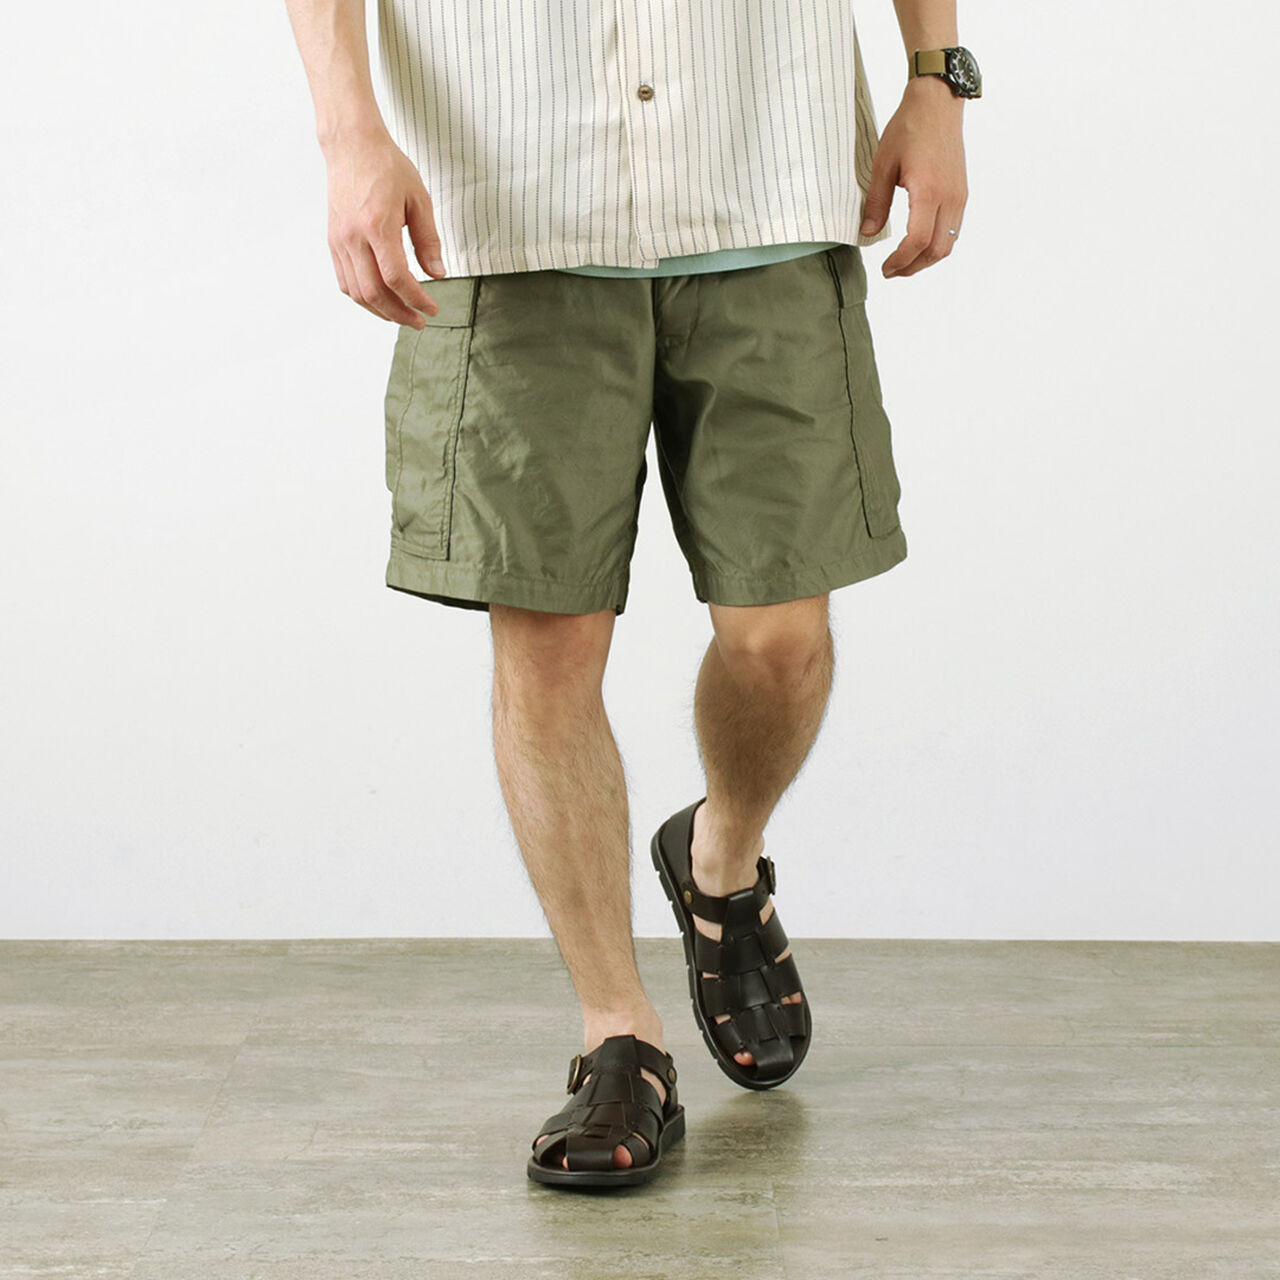 F4169 M-65 Field Cargo Shorts,Olive, large image number 0